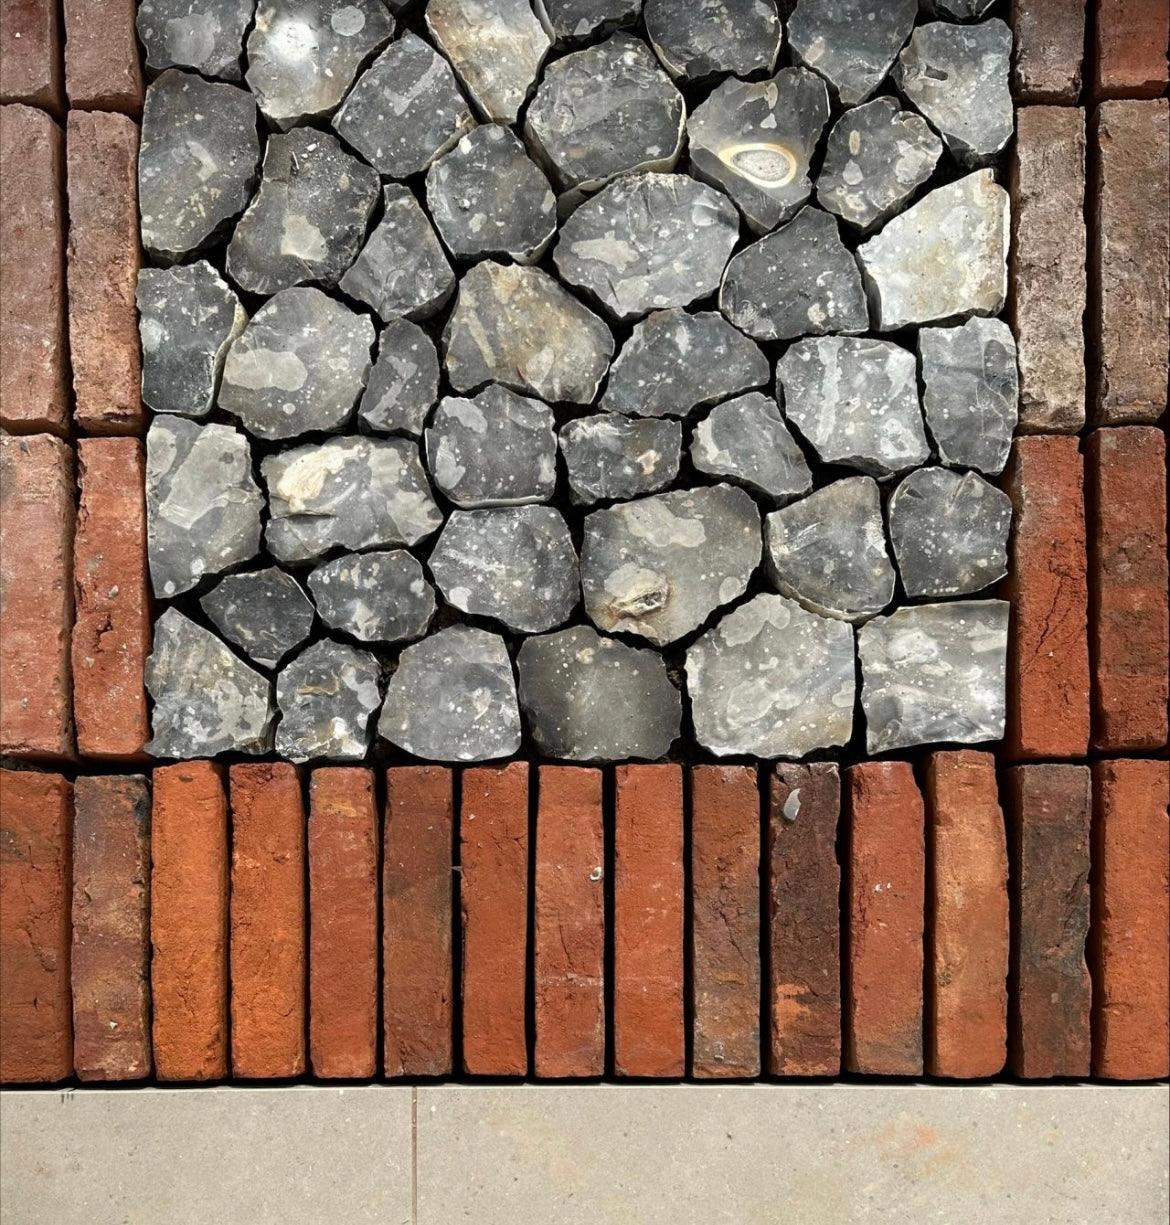 Reclaimed Handmade Clay Paving Brick Paver | Pack of 400 Pavers | Free Delivery - Reclaimed Brick Company